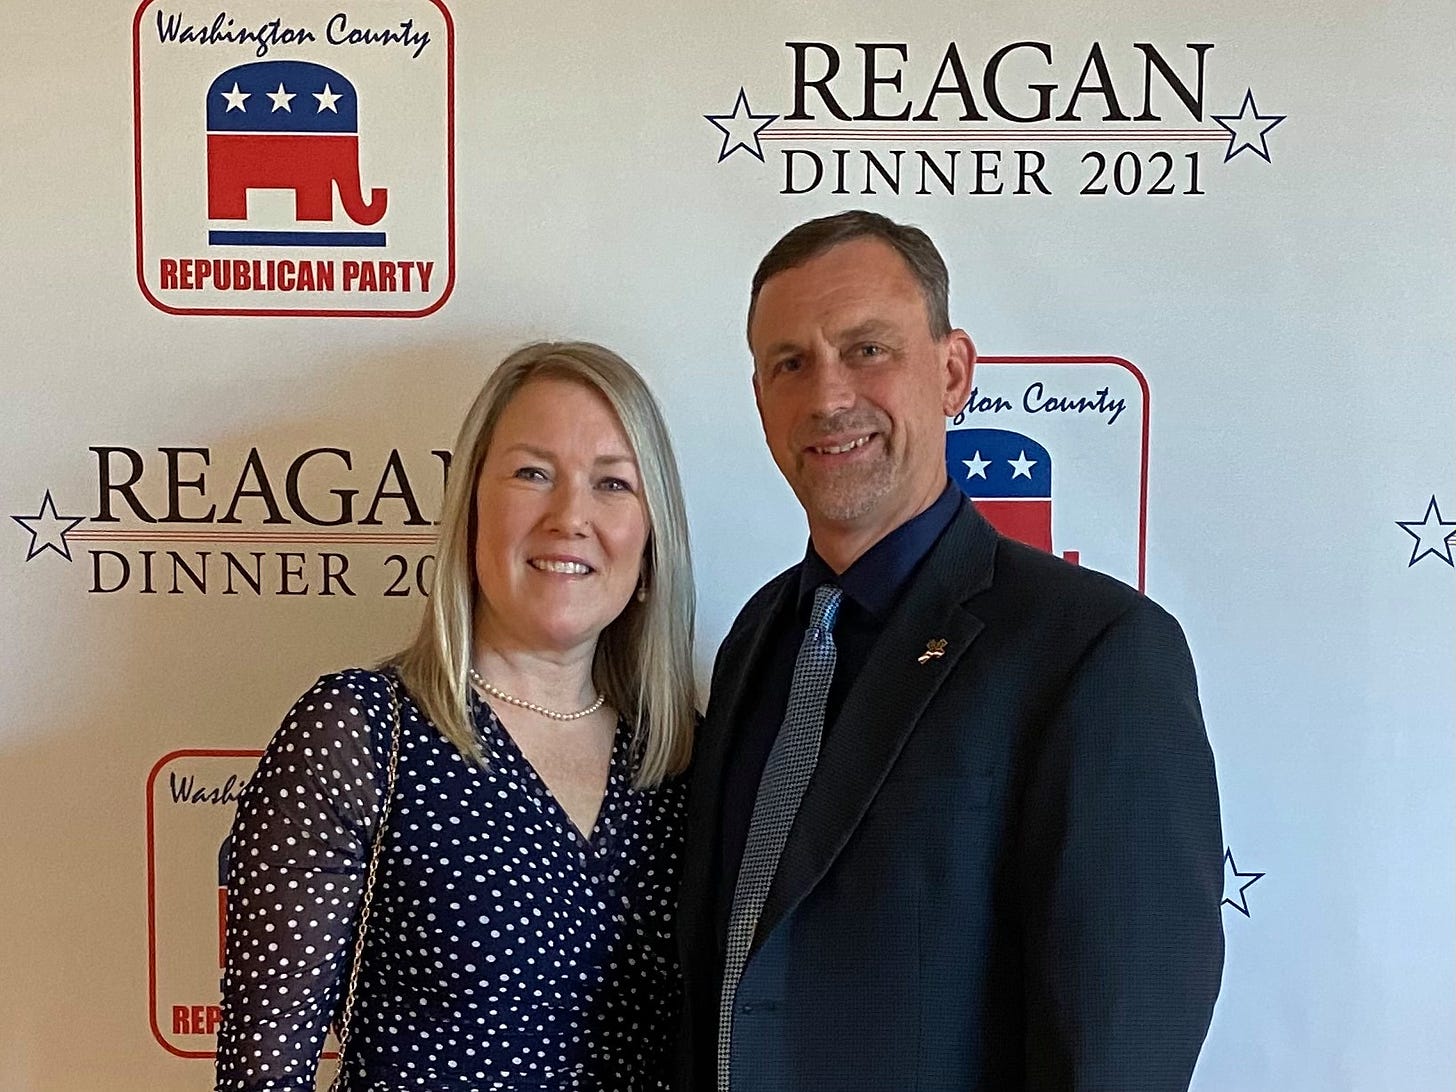 May be an image of one or more people, people standing and text that says 'Washington County REPUBLICAN PARTY REAGAN DINNER 2021 fton County REAGAT DINNER 20 000 Washi REP'